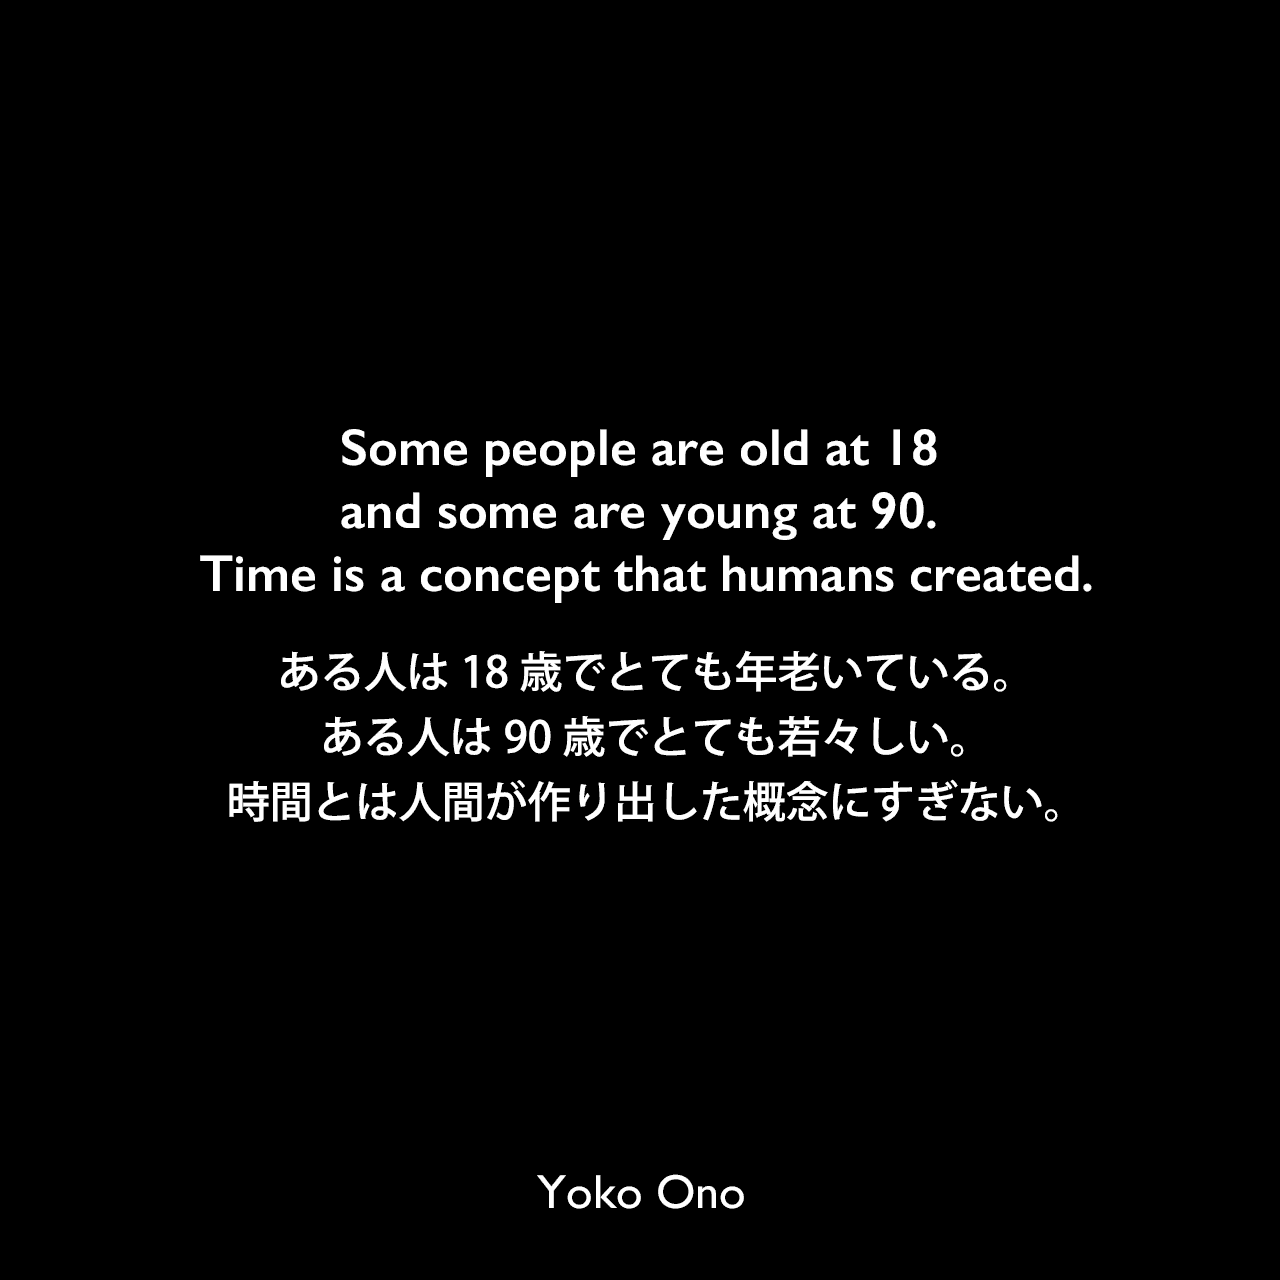 Some people are old at 18 and some are young at 90. Time is a concept that humans created.ある人は18歳でとても年老いている。ある人は90歳でとても若々しい。時間とは人間が作り出した概念にすぎない。Yoko Ono